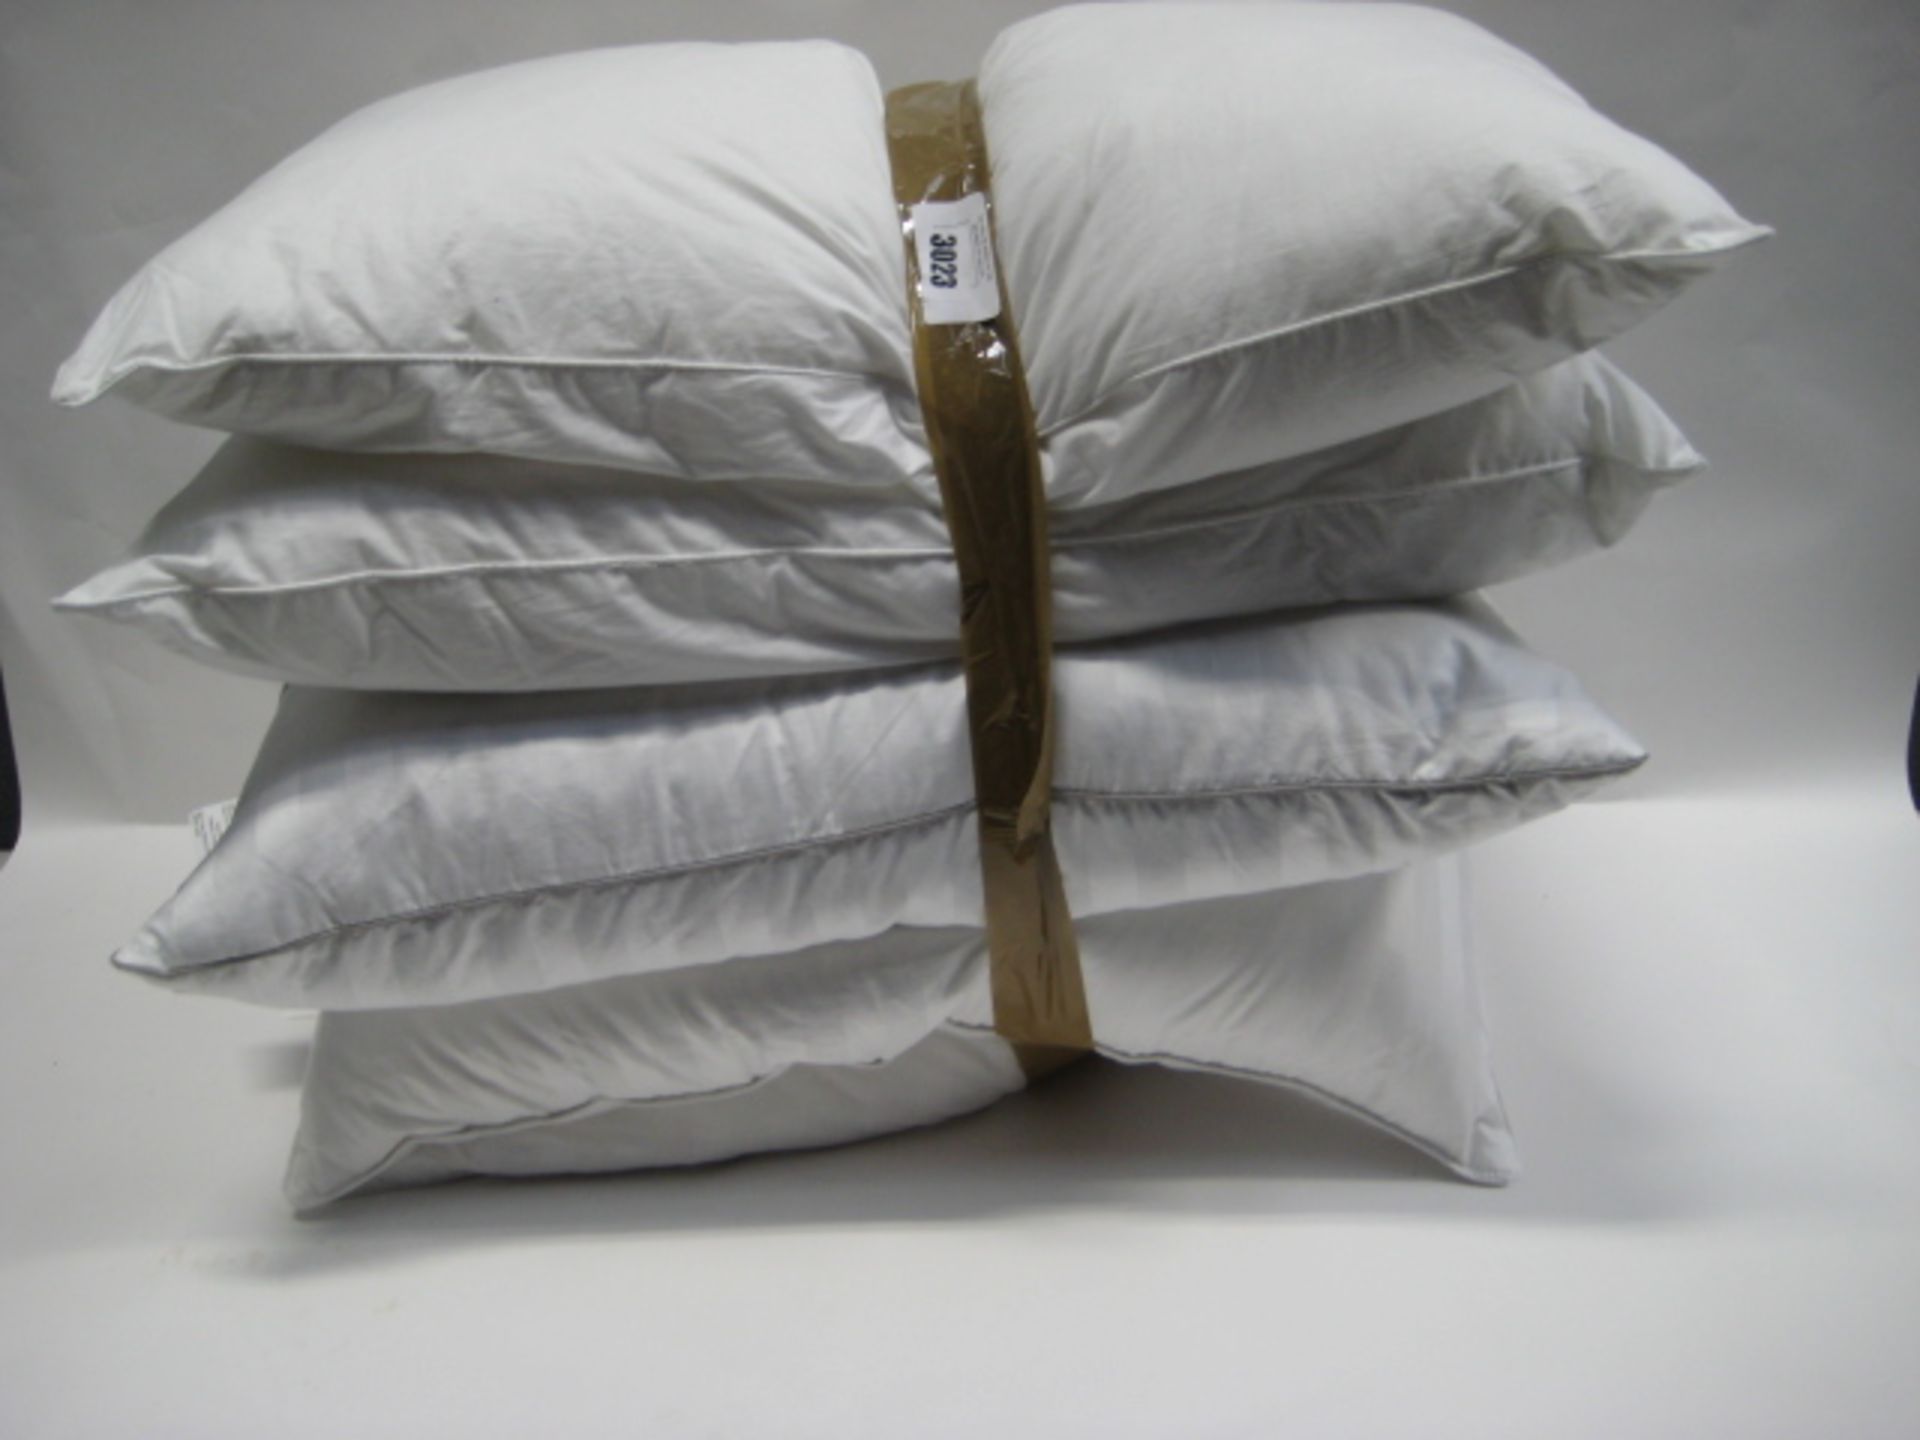 Five various makes of pillows, all unbagged